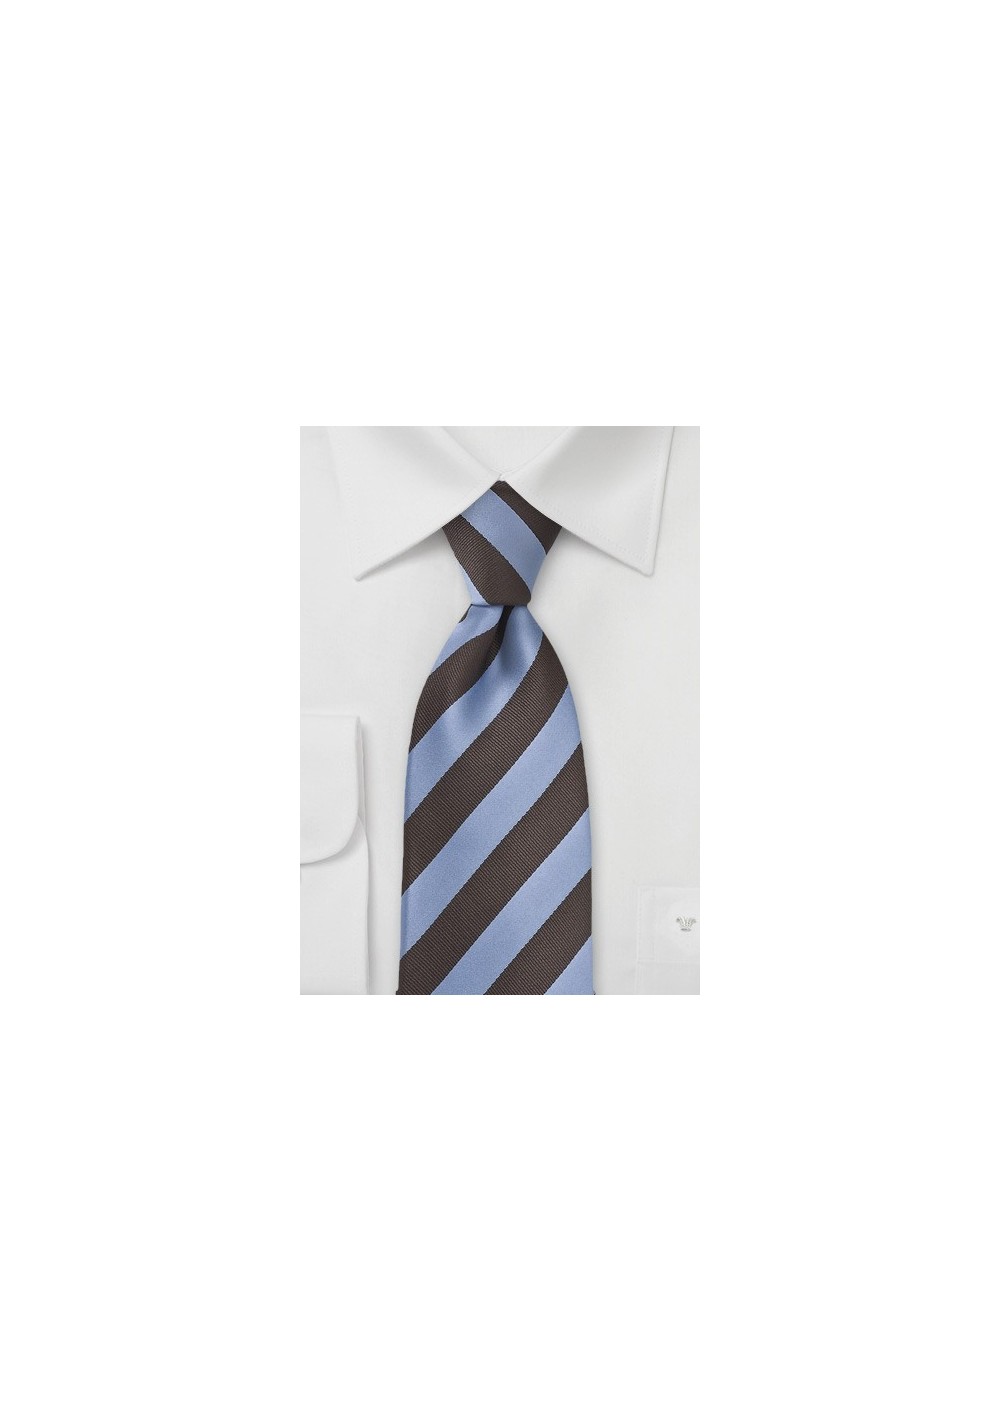 Dragonfly Blue and Brown Striped Tie in XL Length